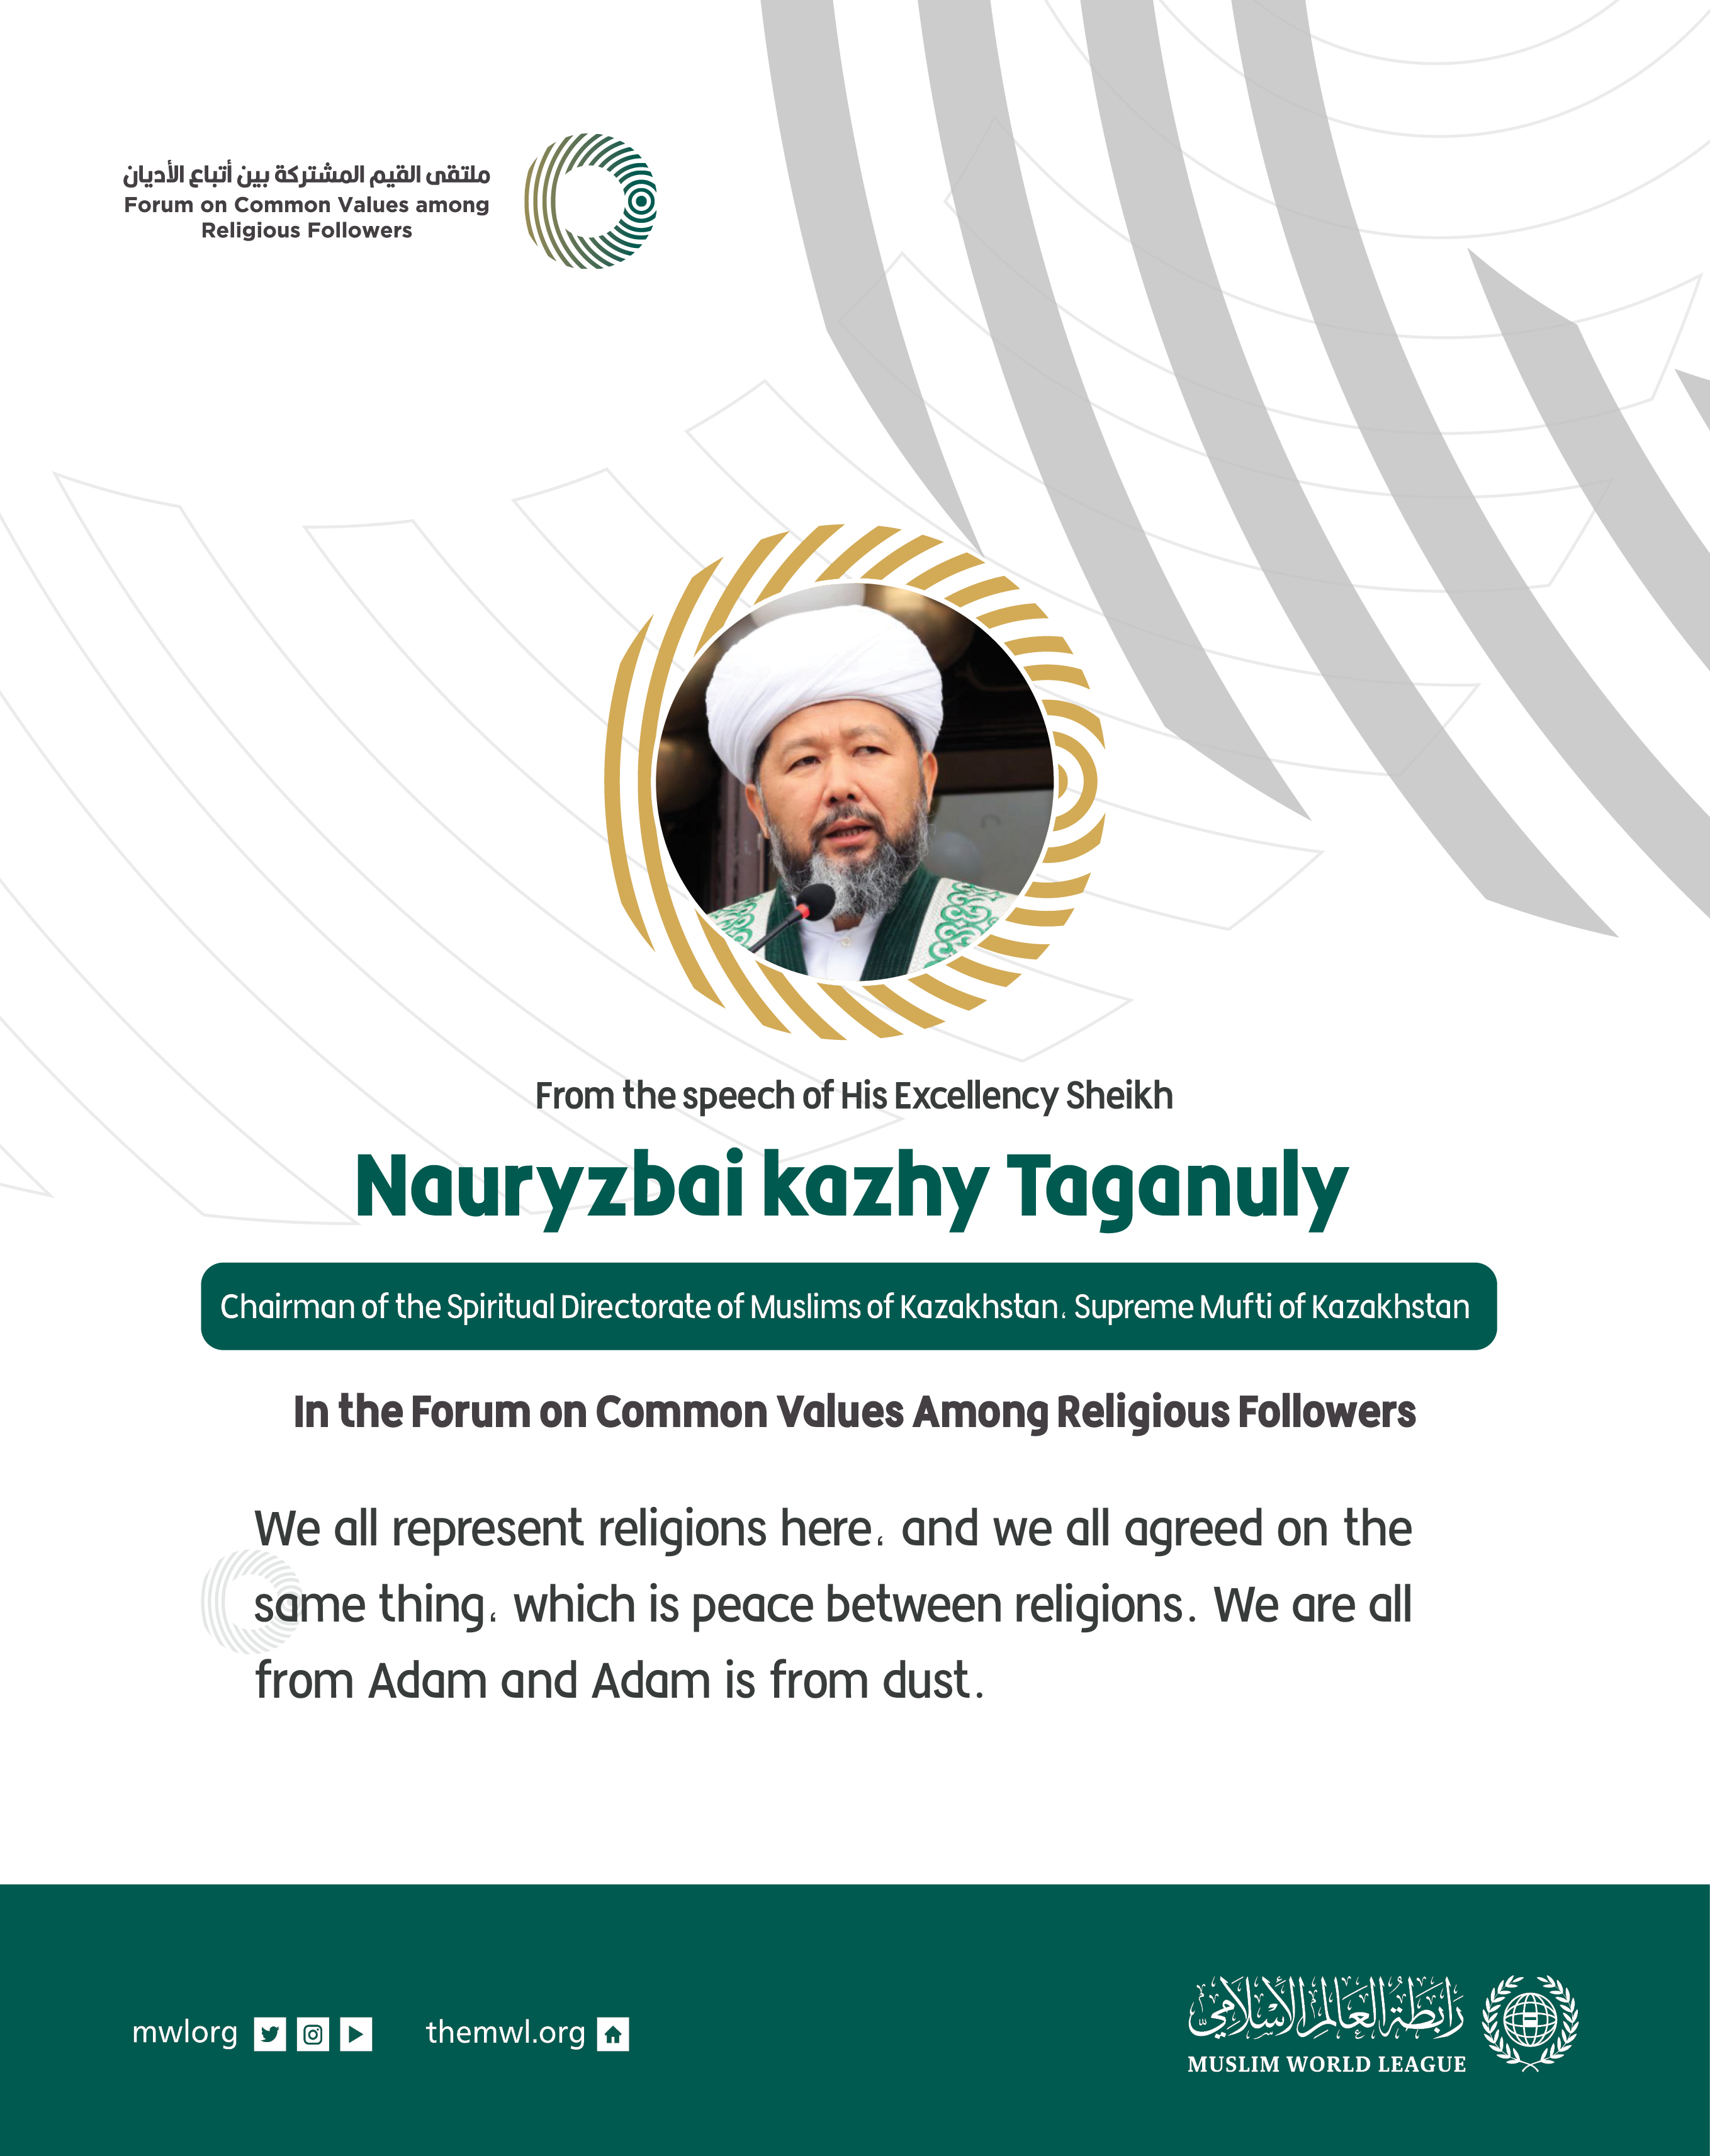 From the speech of His Excellency, Chairman of the Spiritual Directorate of Muslims of Kazakhstan, Supreme Mufti of Kazakhstan, Sheikh Nauryzbai kazhy Taganuly in the Forum on Common Values Among Religious Followers in Riyadh: 